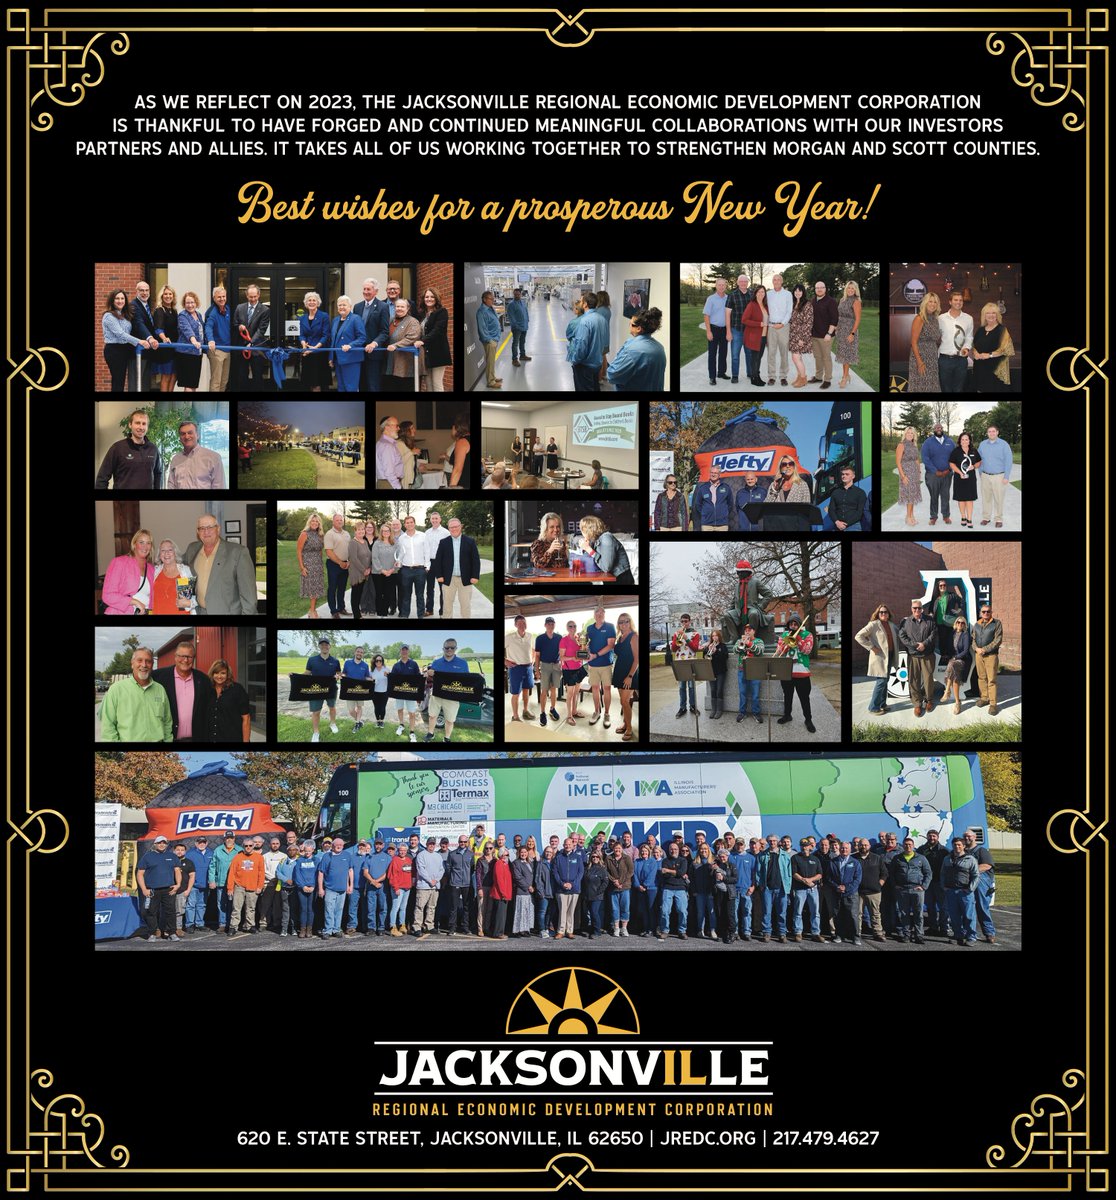 As we reflect on 2023, the JREDC is thankful to have formed and continued meaningful collaborations with our investors, partners & allies. It takes all of us working together to strengthen Morgan and Scott counties.🎉 #HappyNewYear #JacksonvilleIL #morgancountyil #scottcountyil